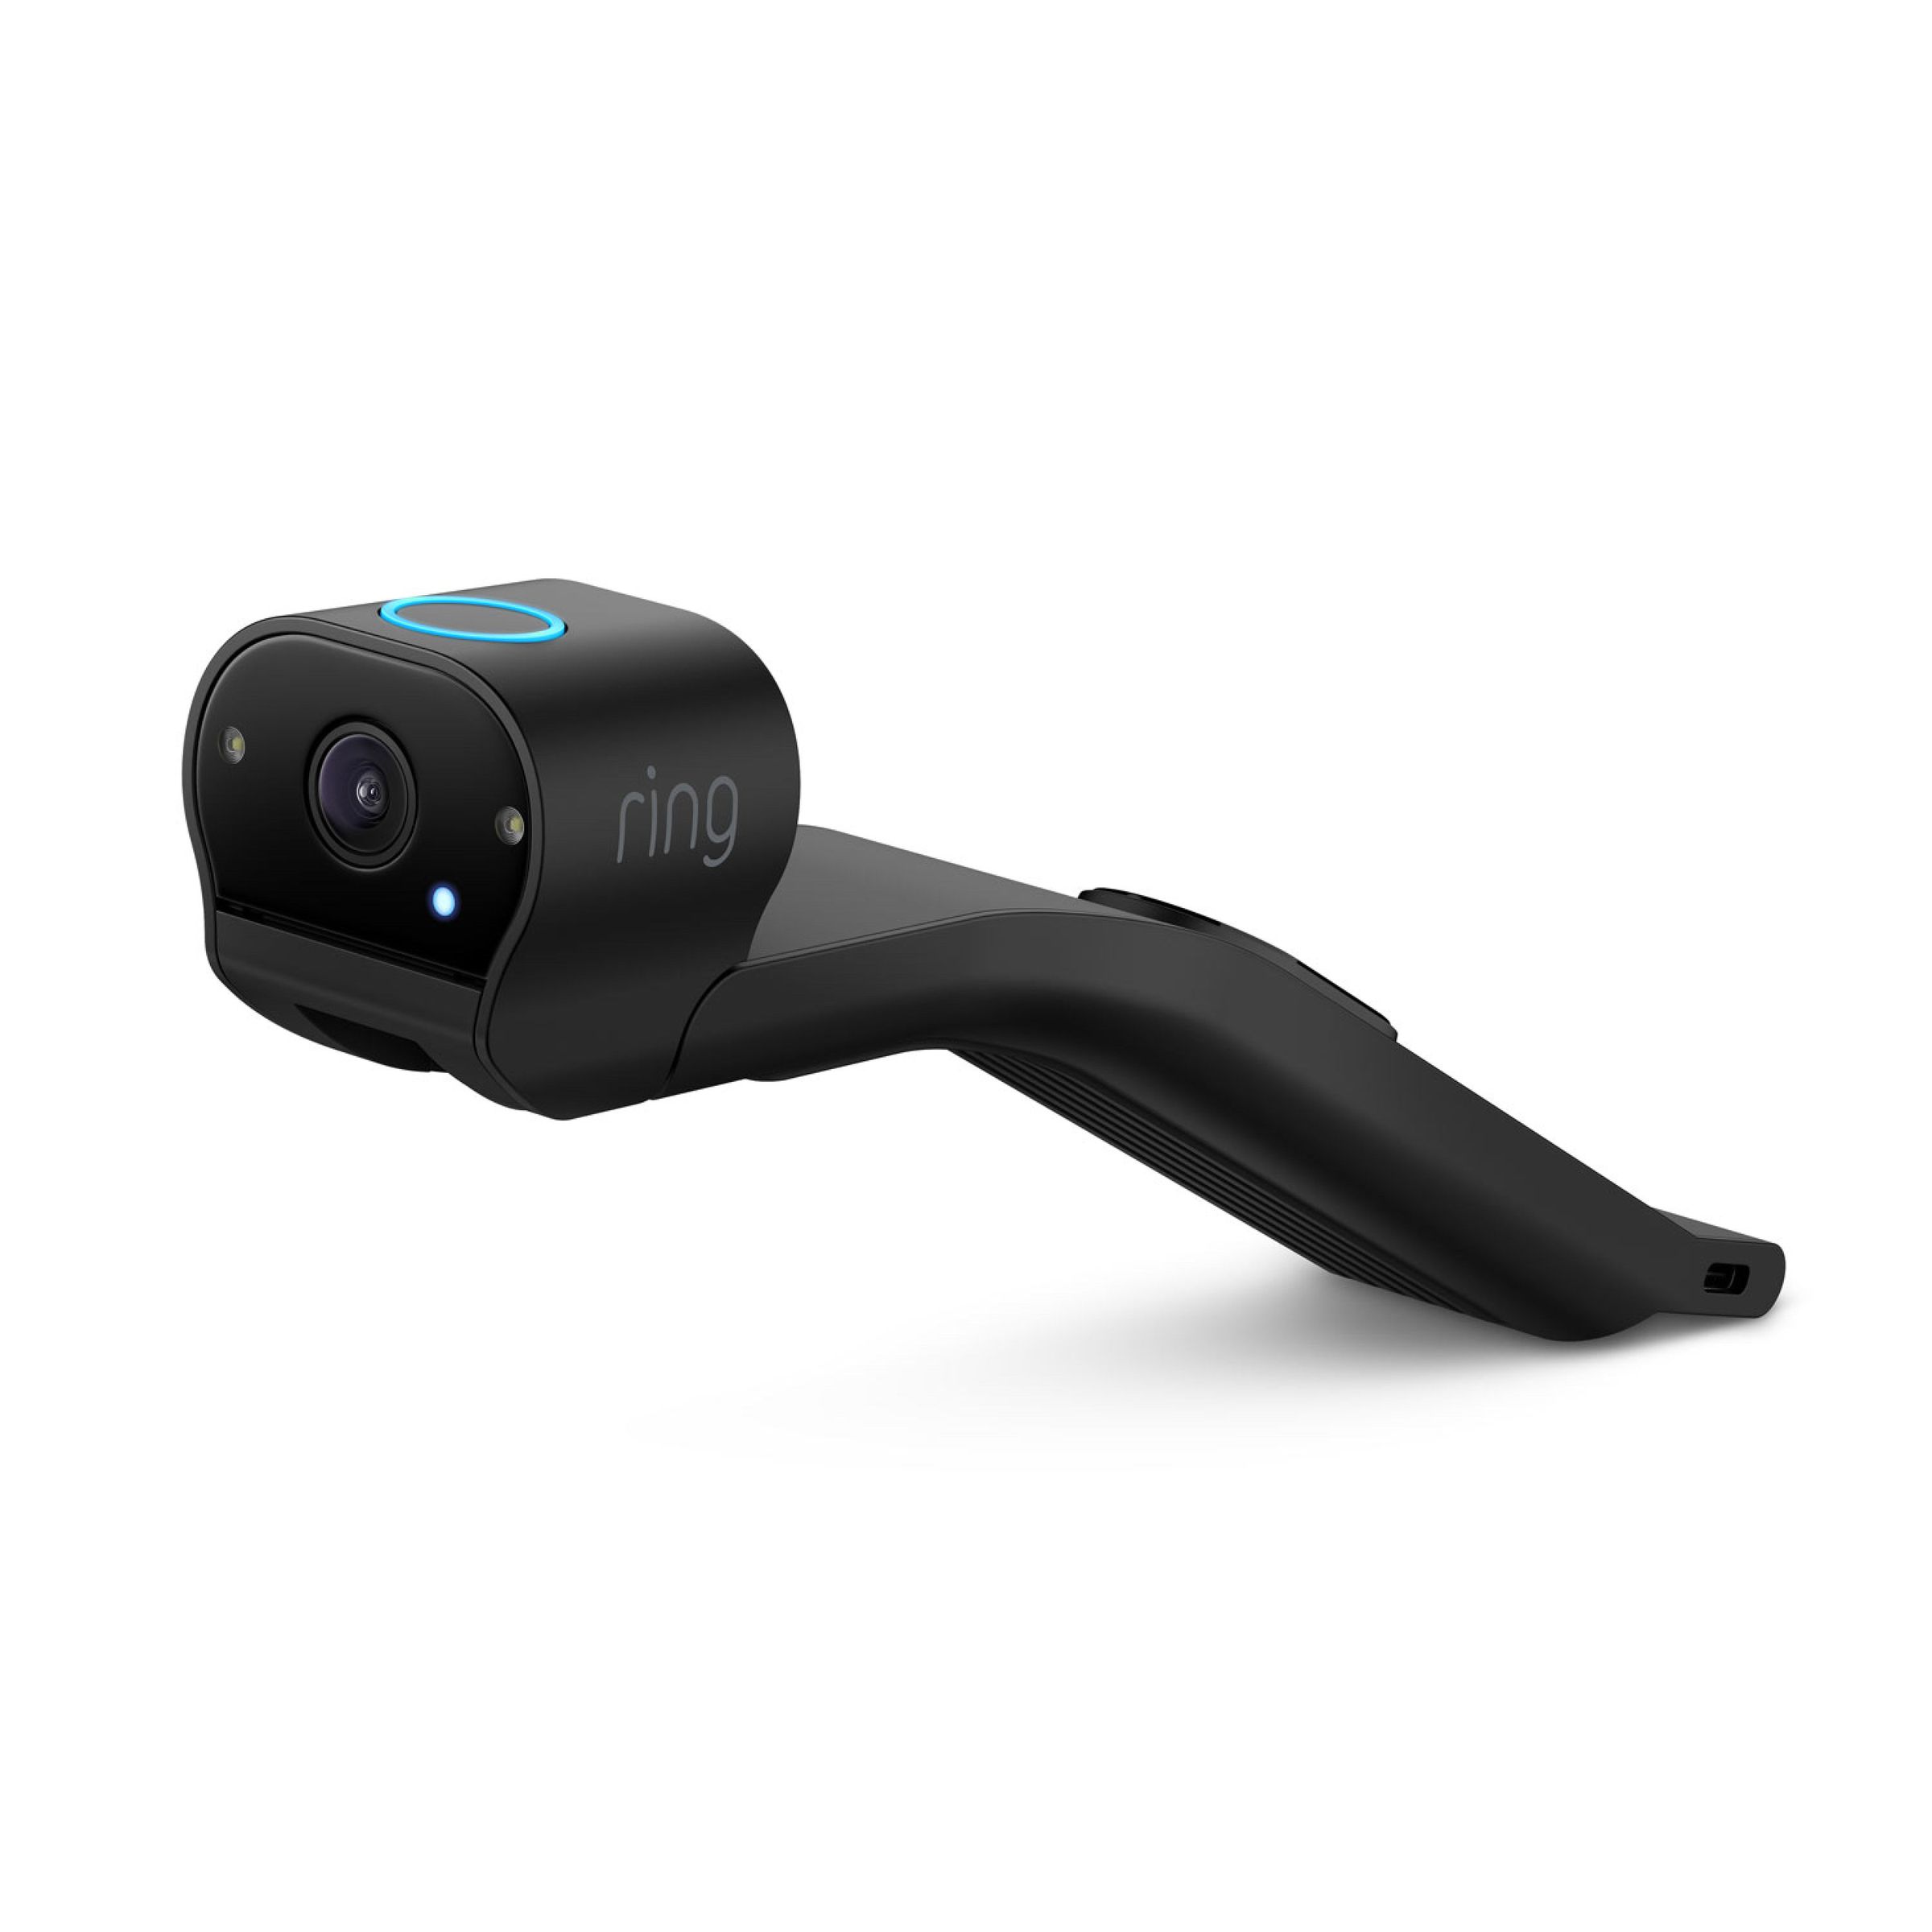 The Ring Car Cam has a front- and rear-facing camera.